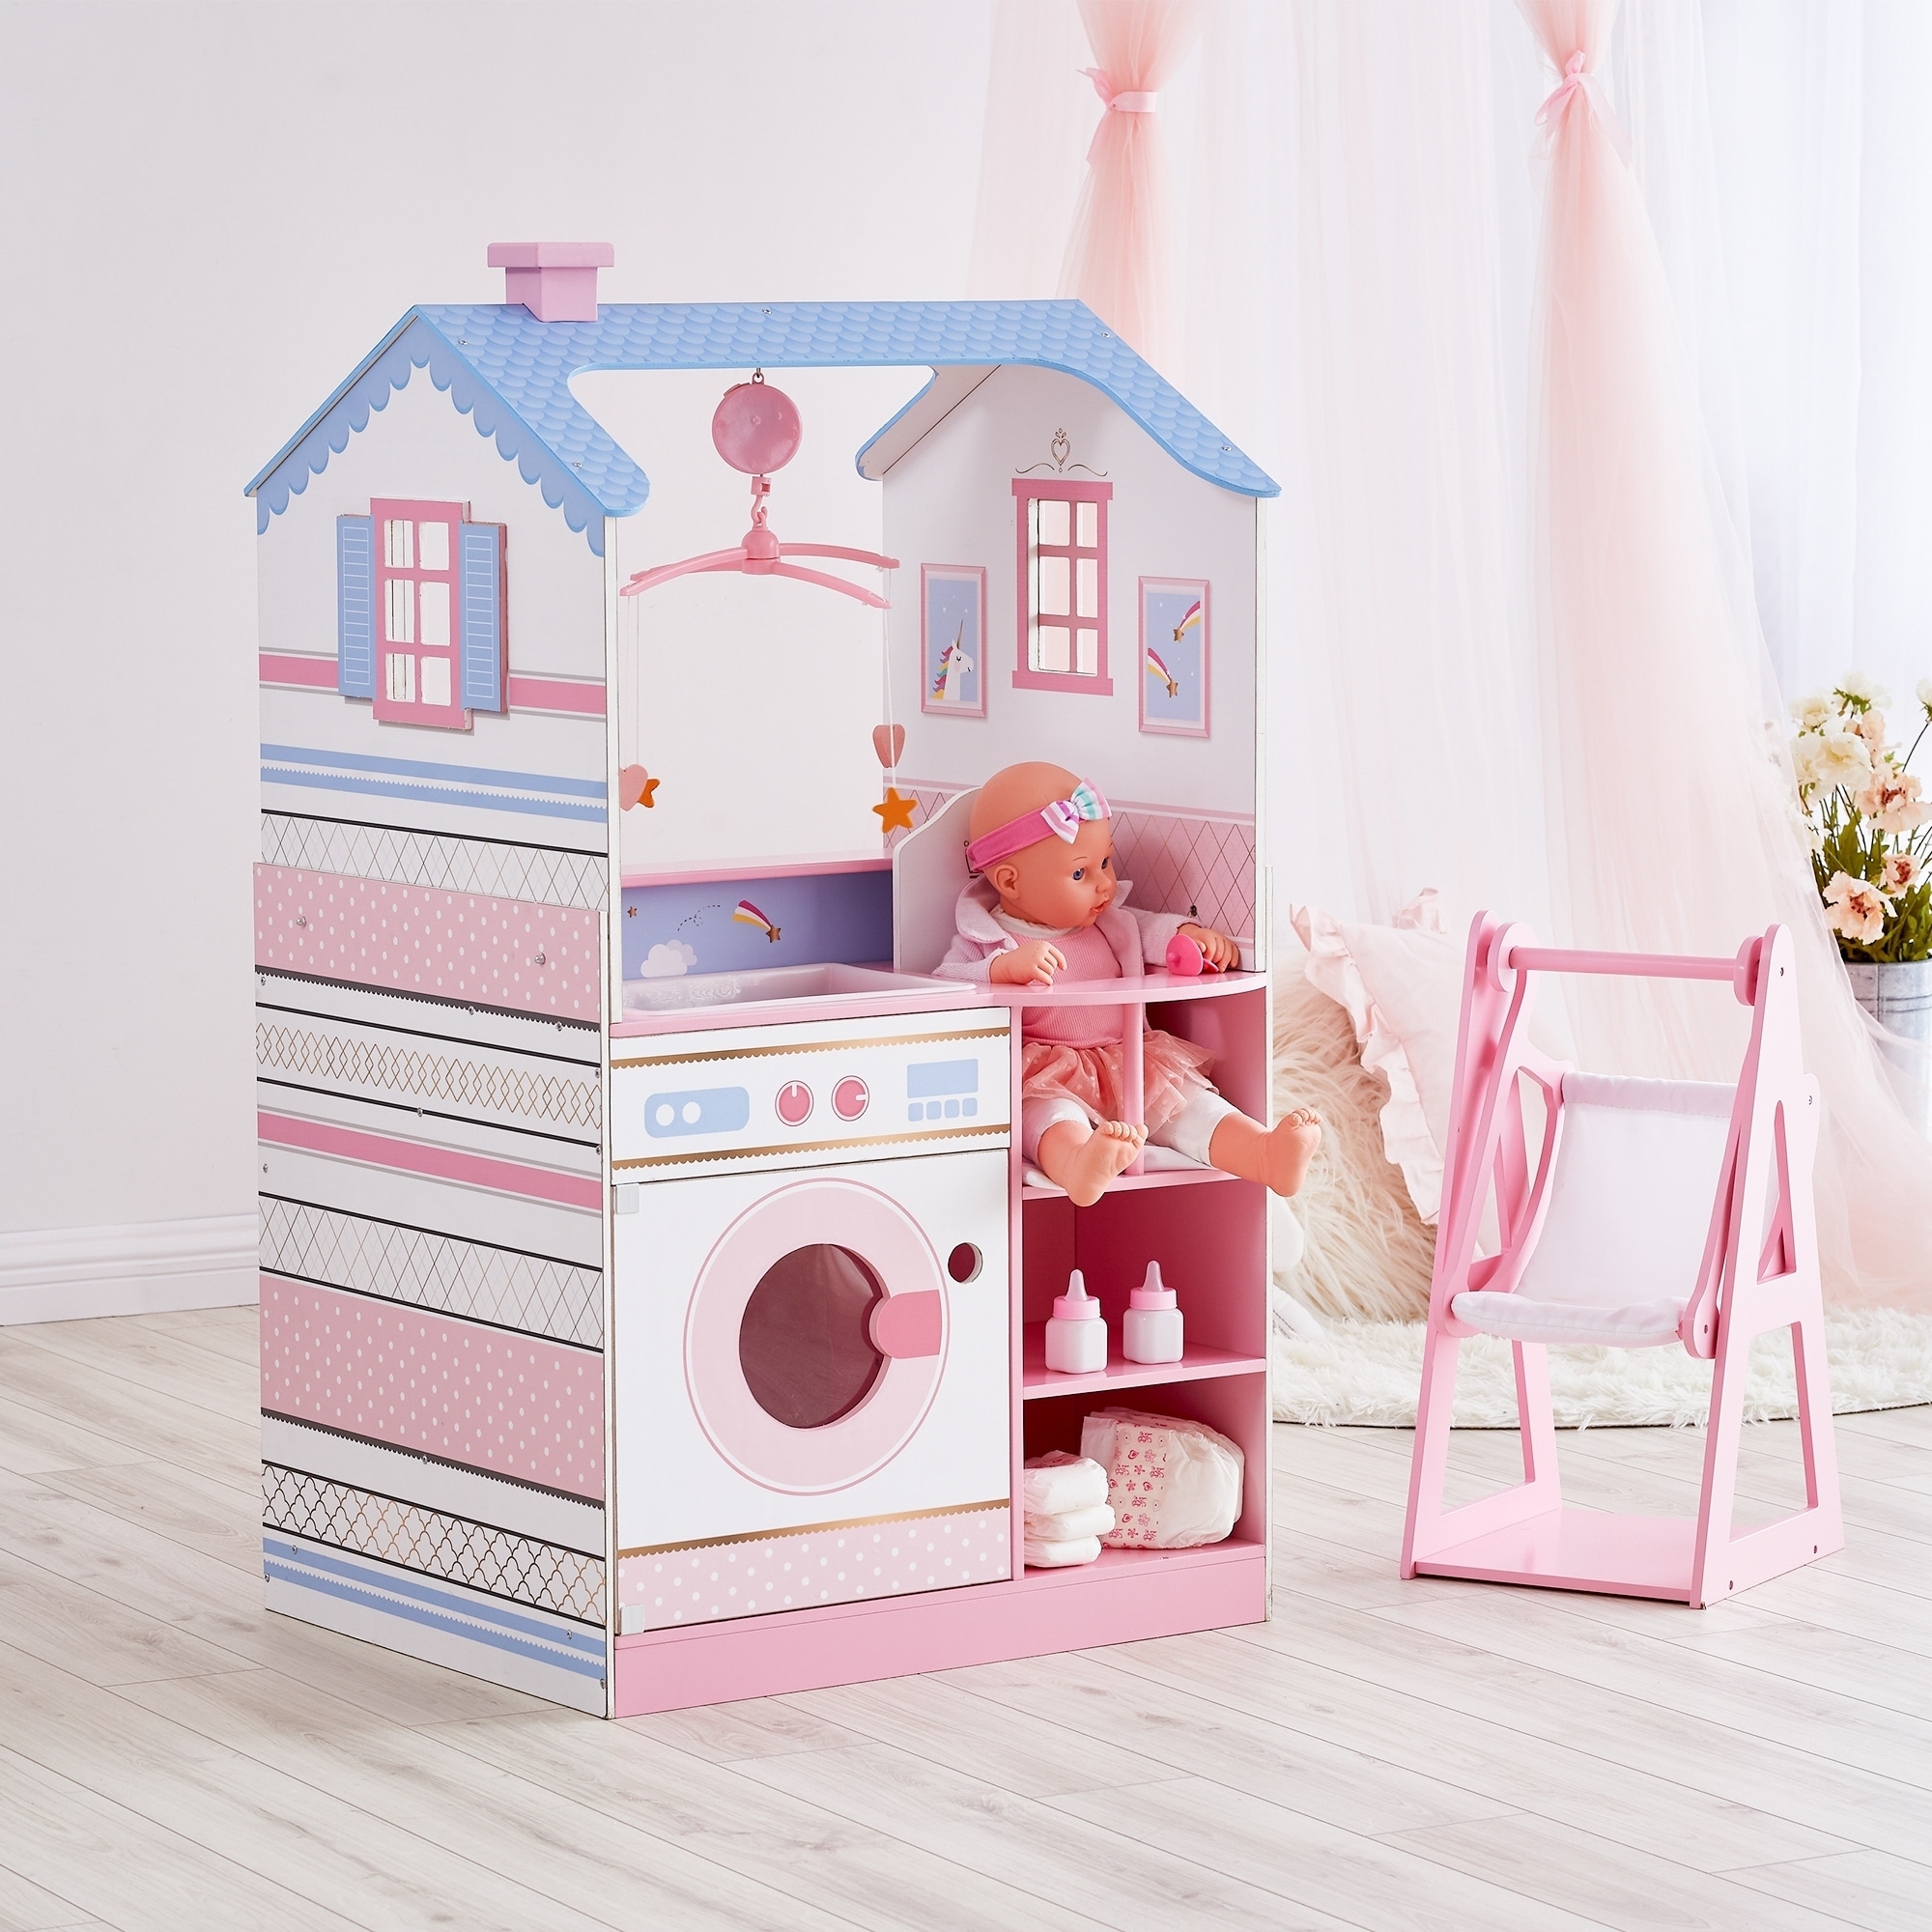 olivia's little world baby doll changing station